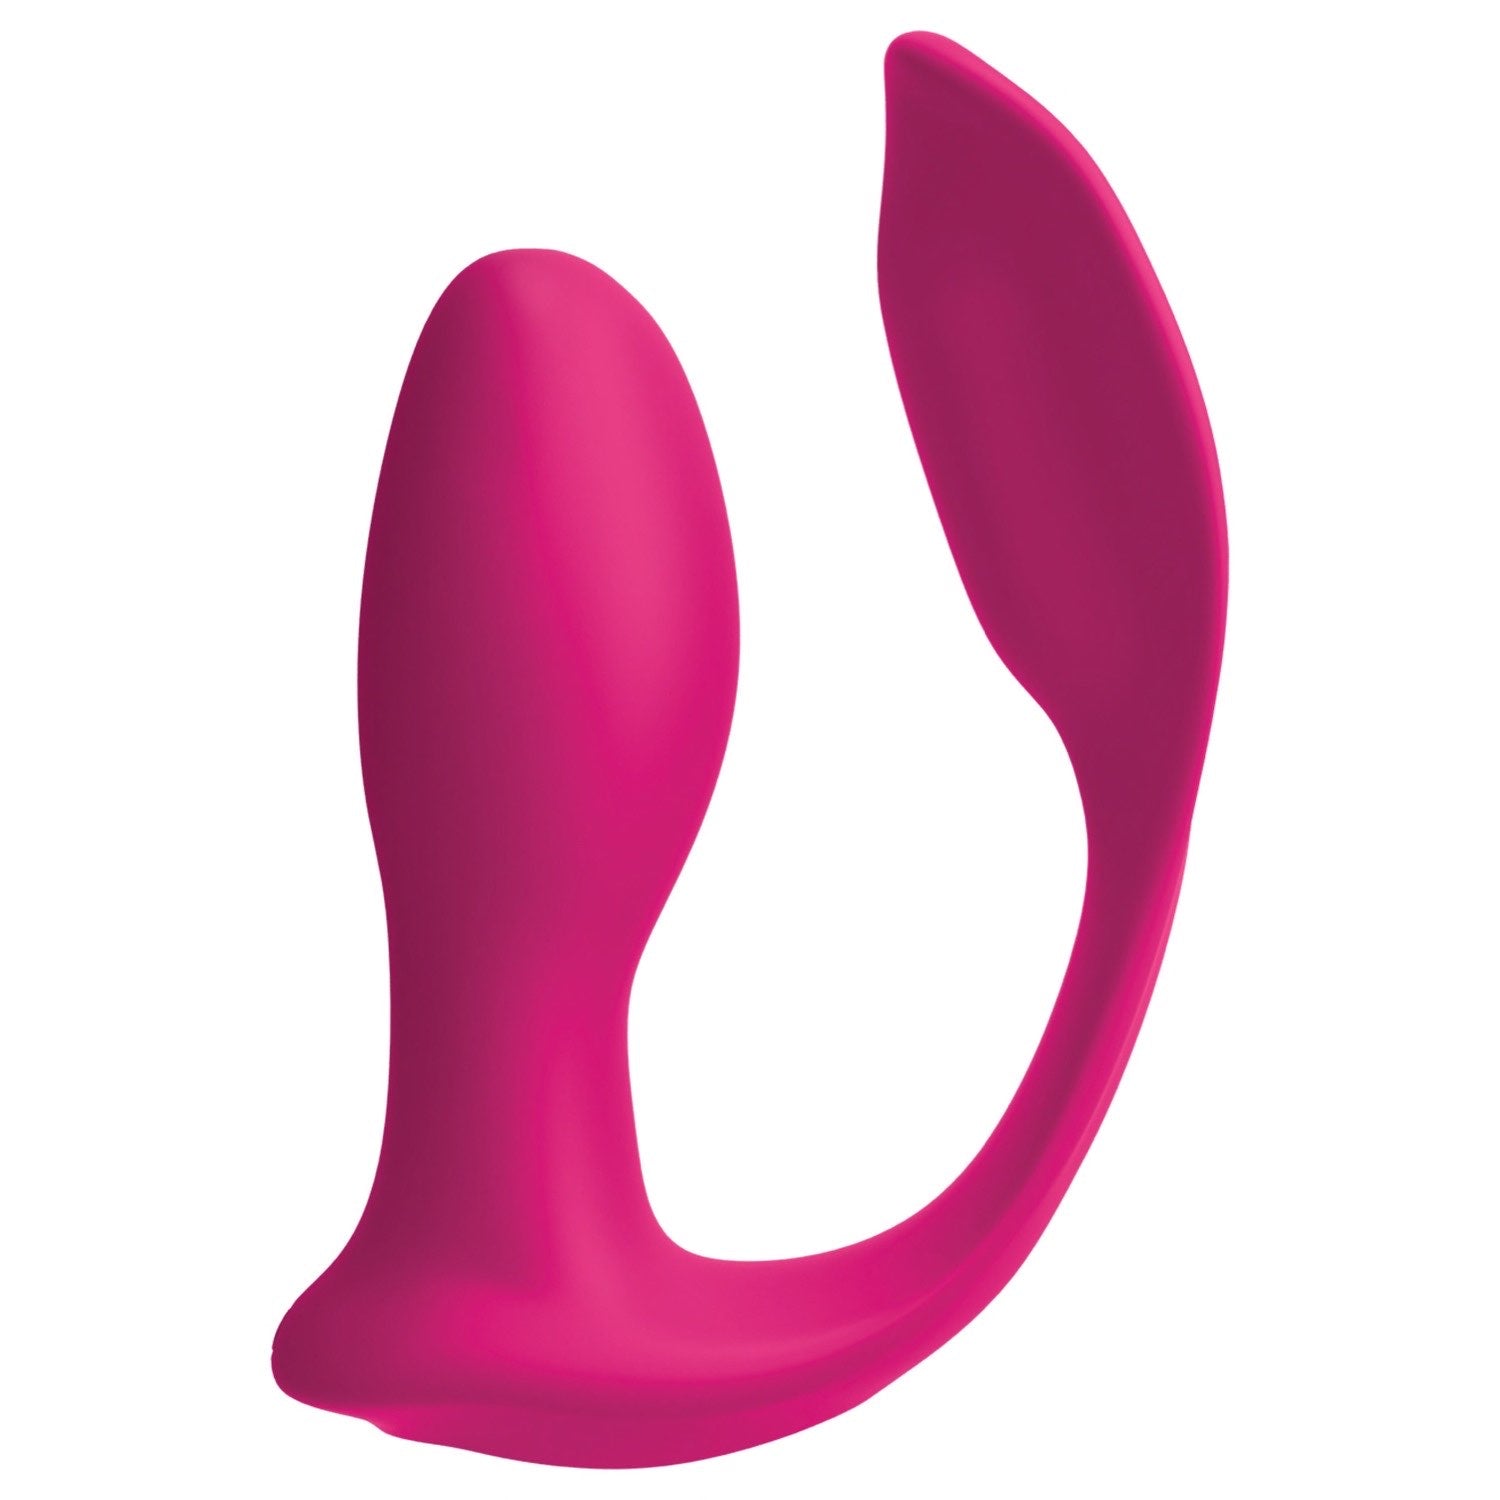 3Some Double Ecstasy - Pink USB Rechargeable Stimulator with Wireless Remote by Pipedream